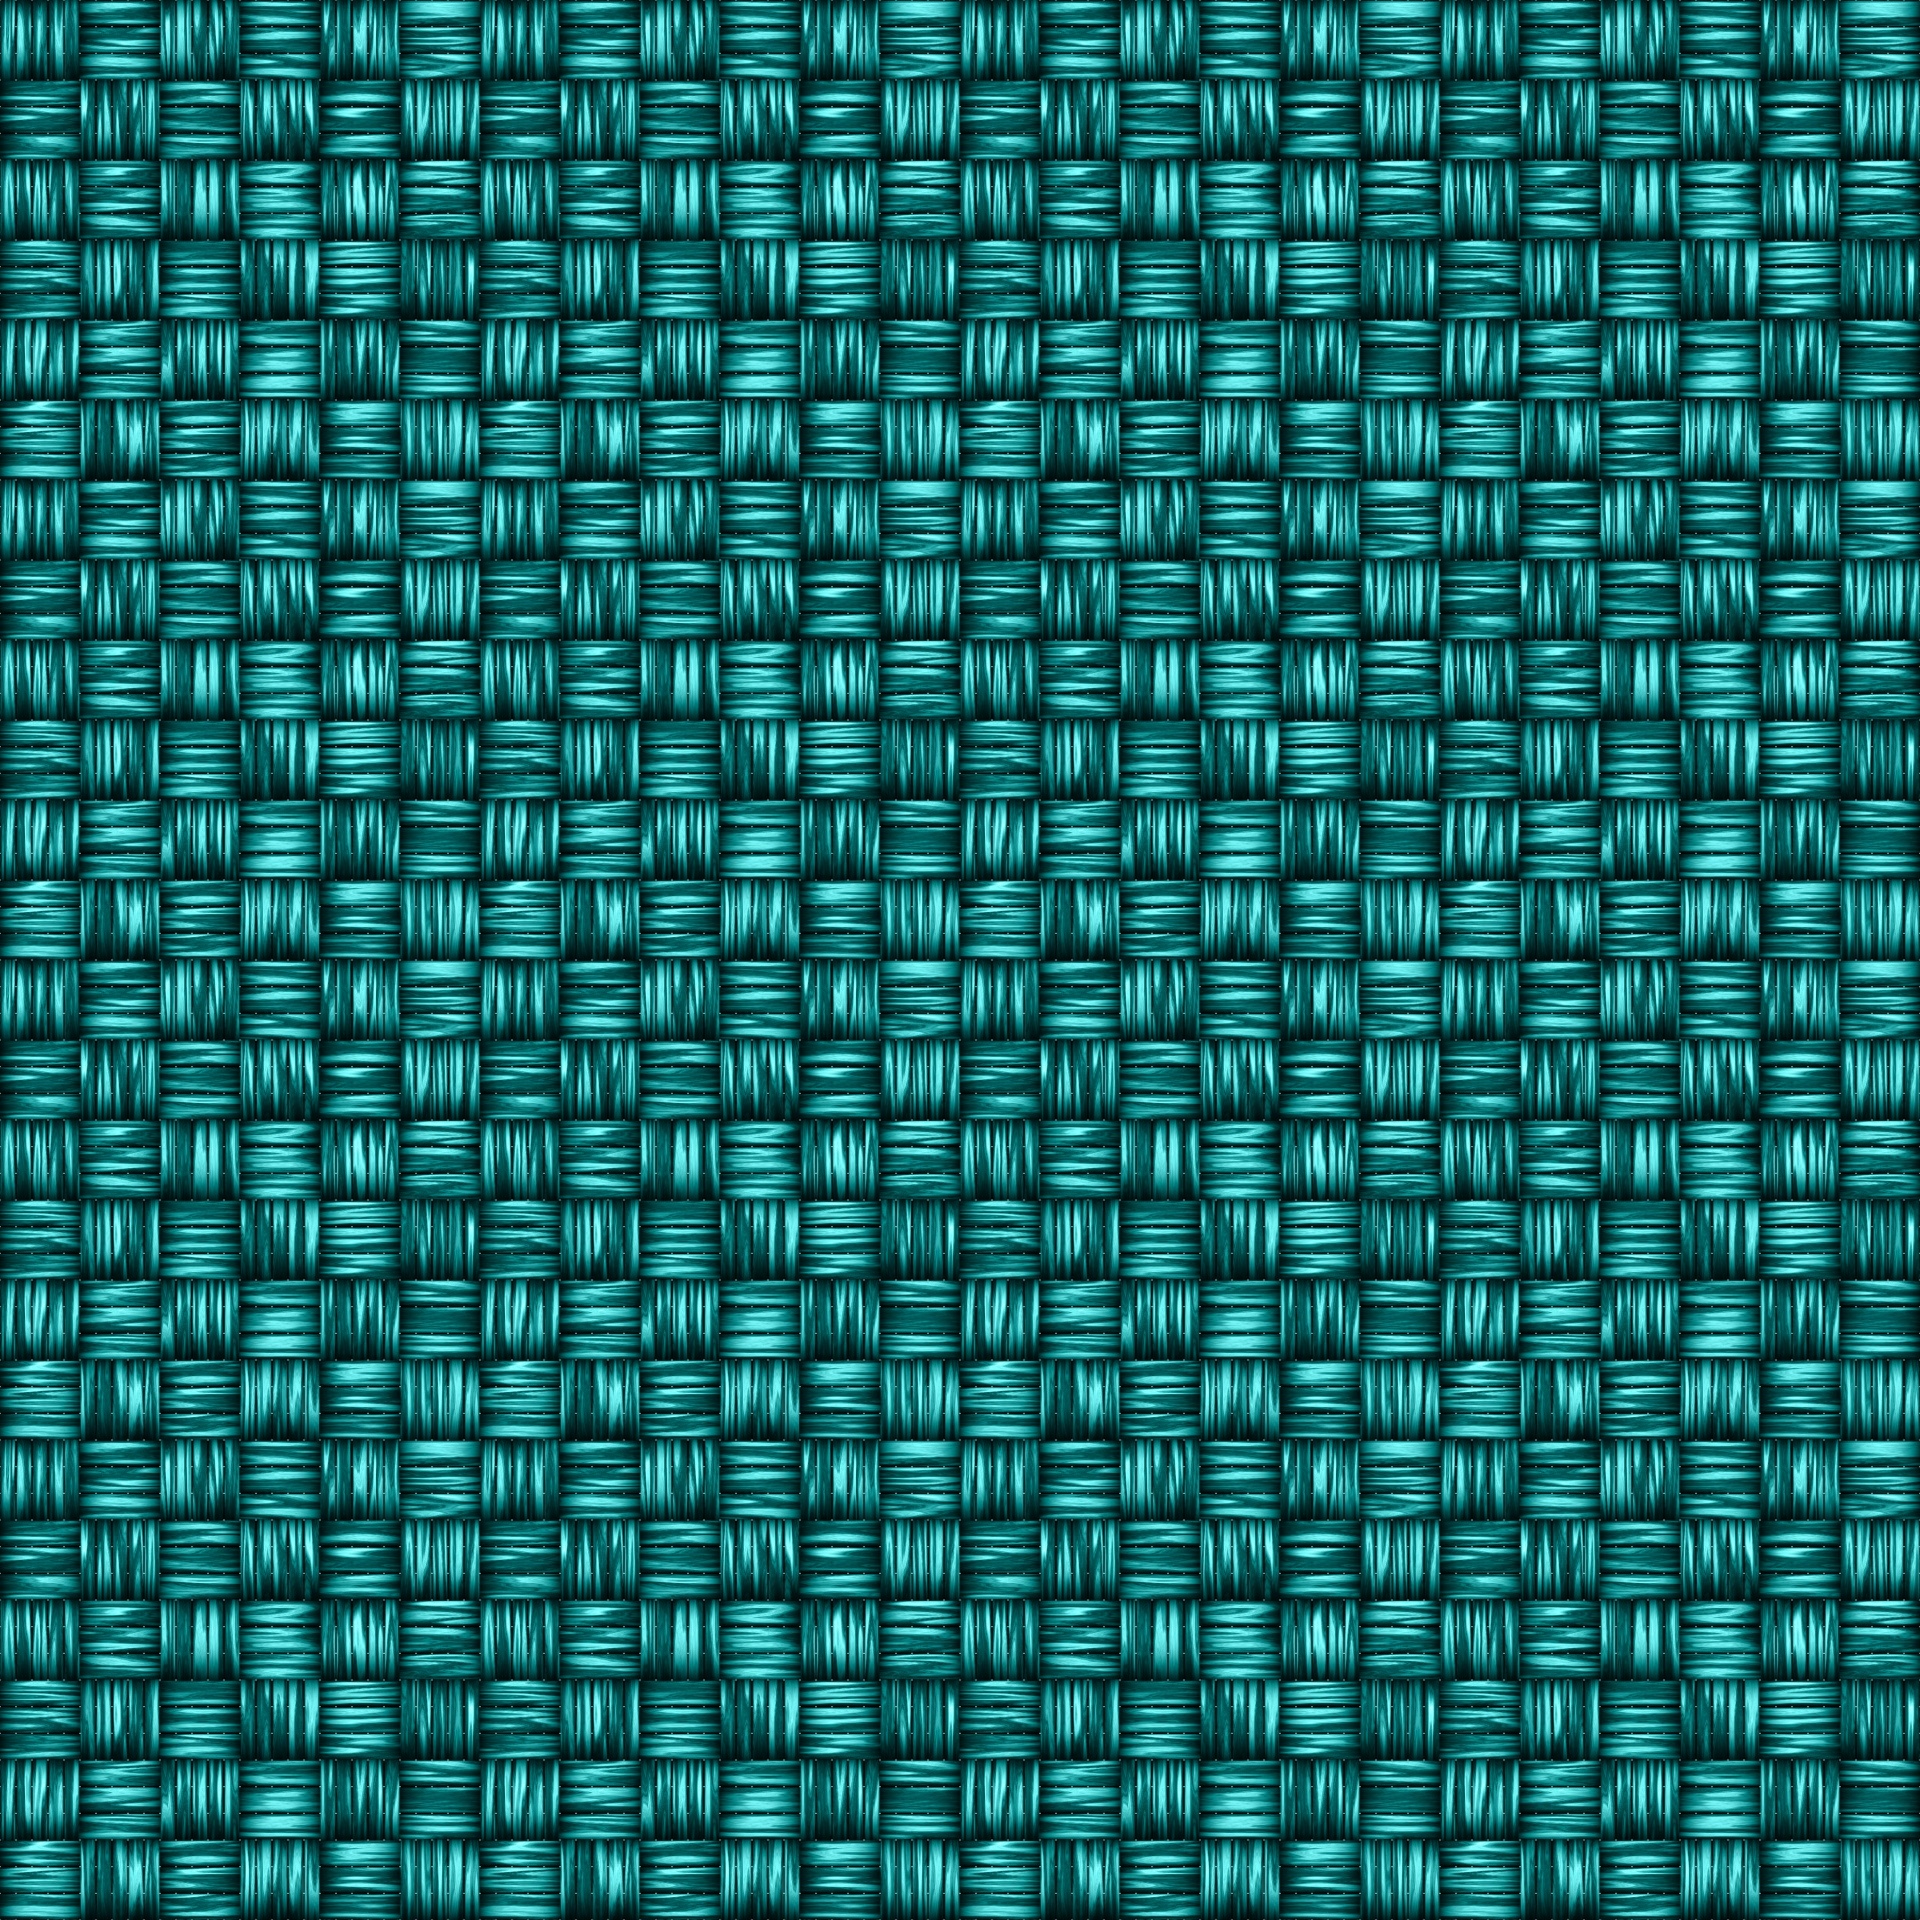 Design paper with woven patterns in shades of turquoise and black